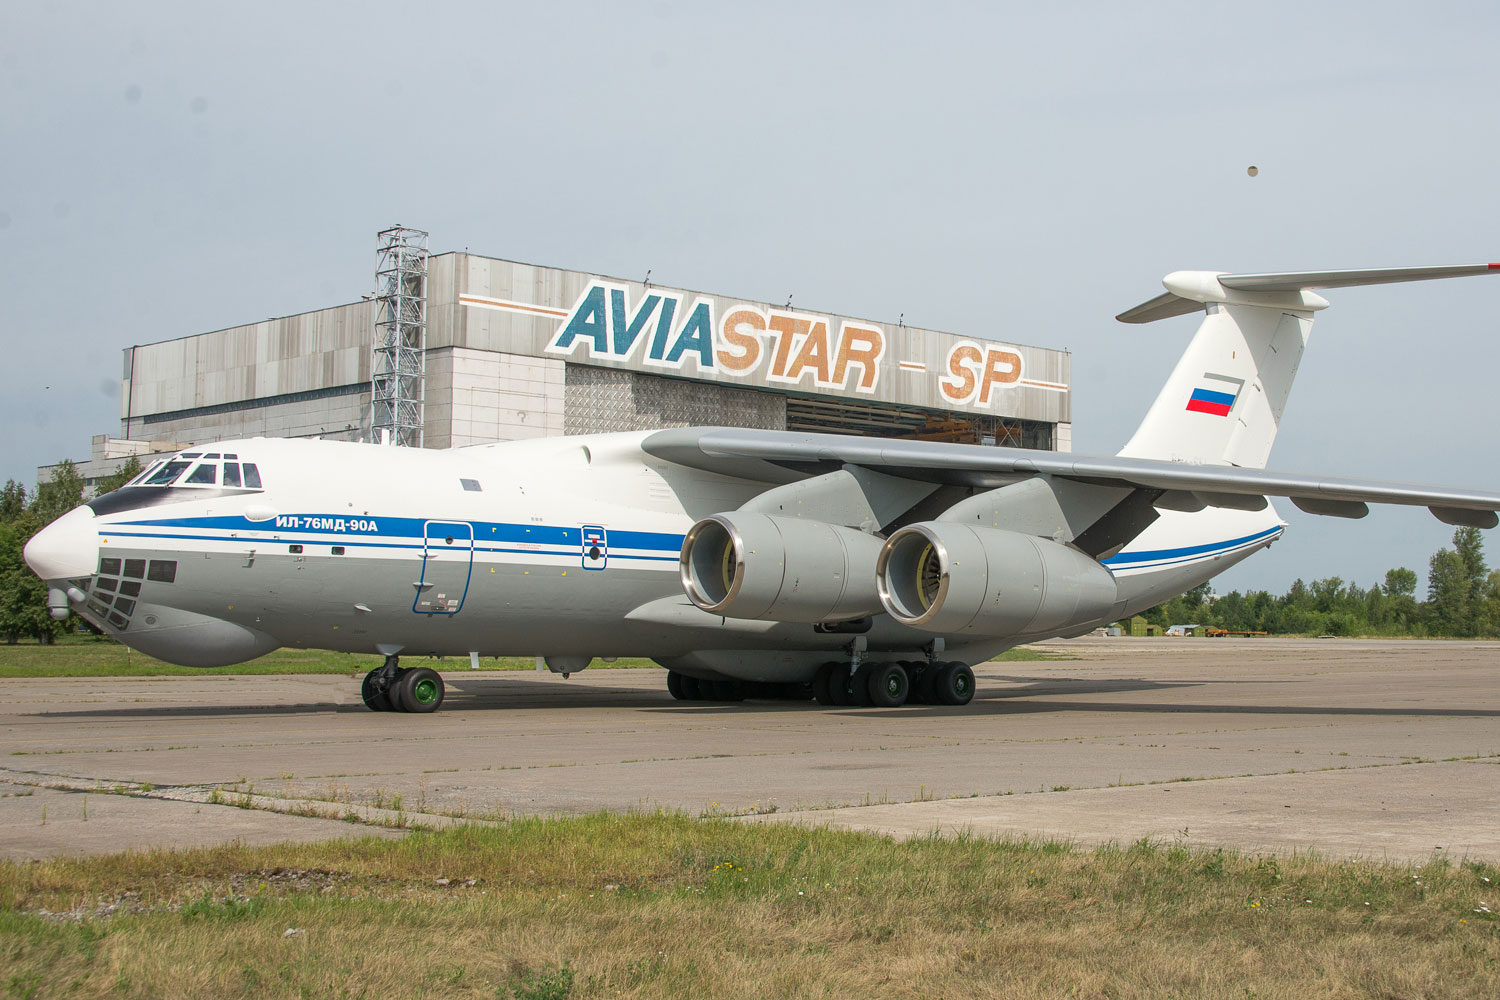 50 Years After First Flight, Il-76 Is Still Being Produced In Russia - Air  Data News